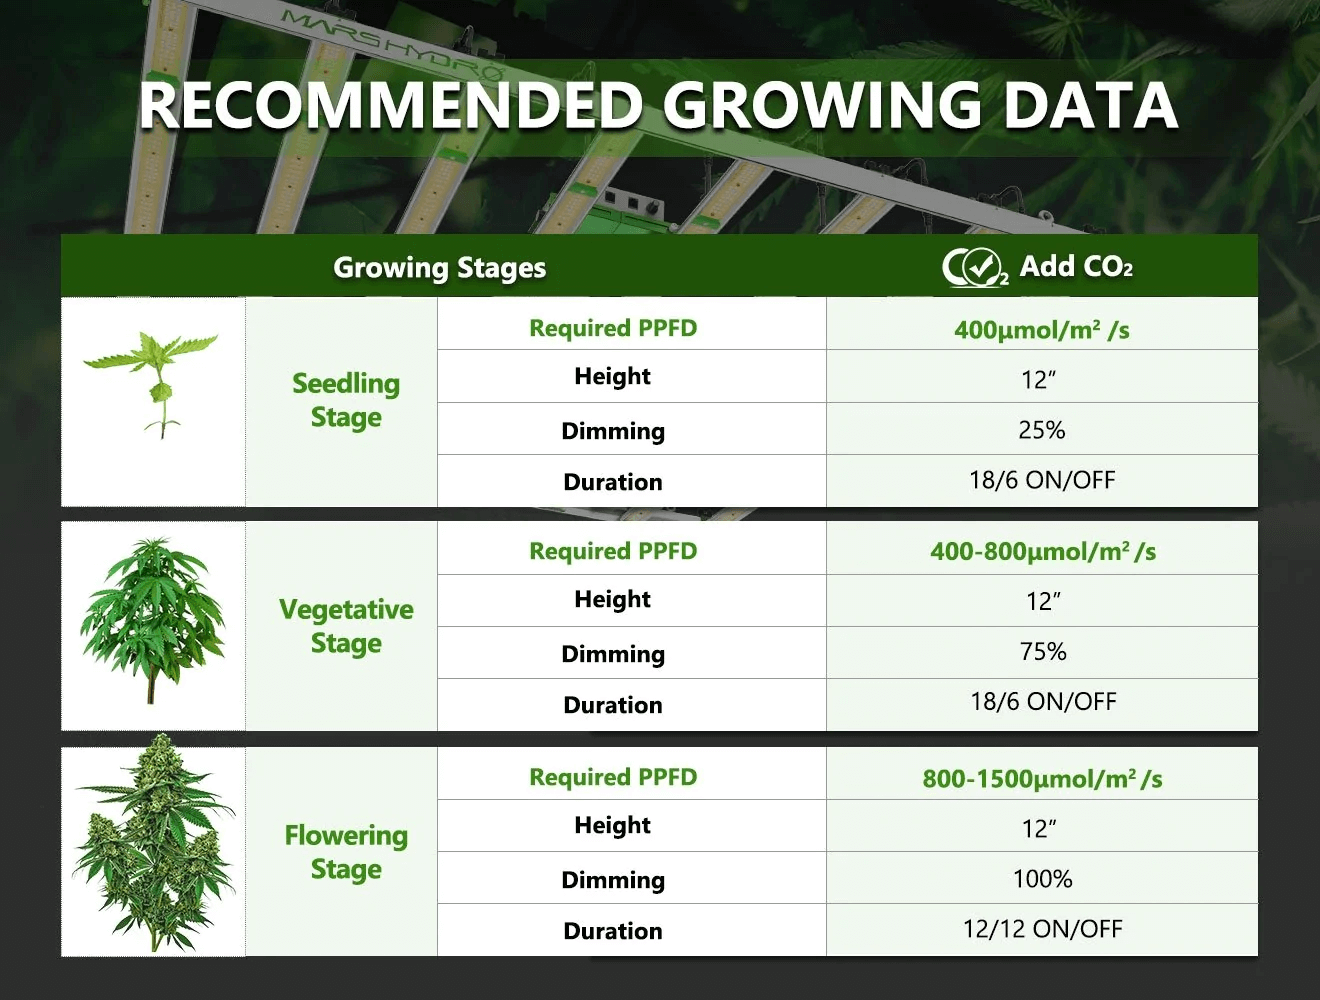 Recommended growing data